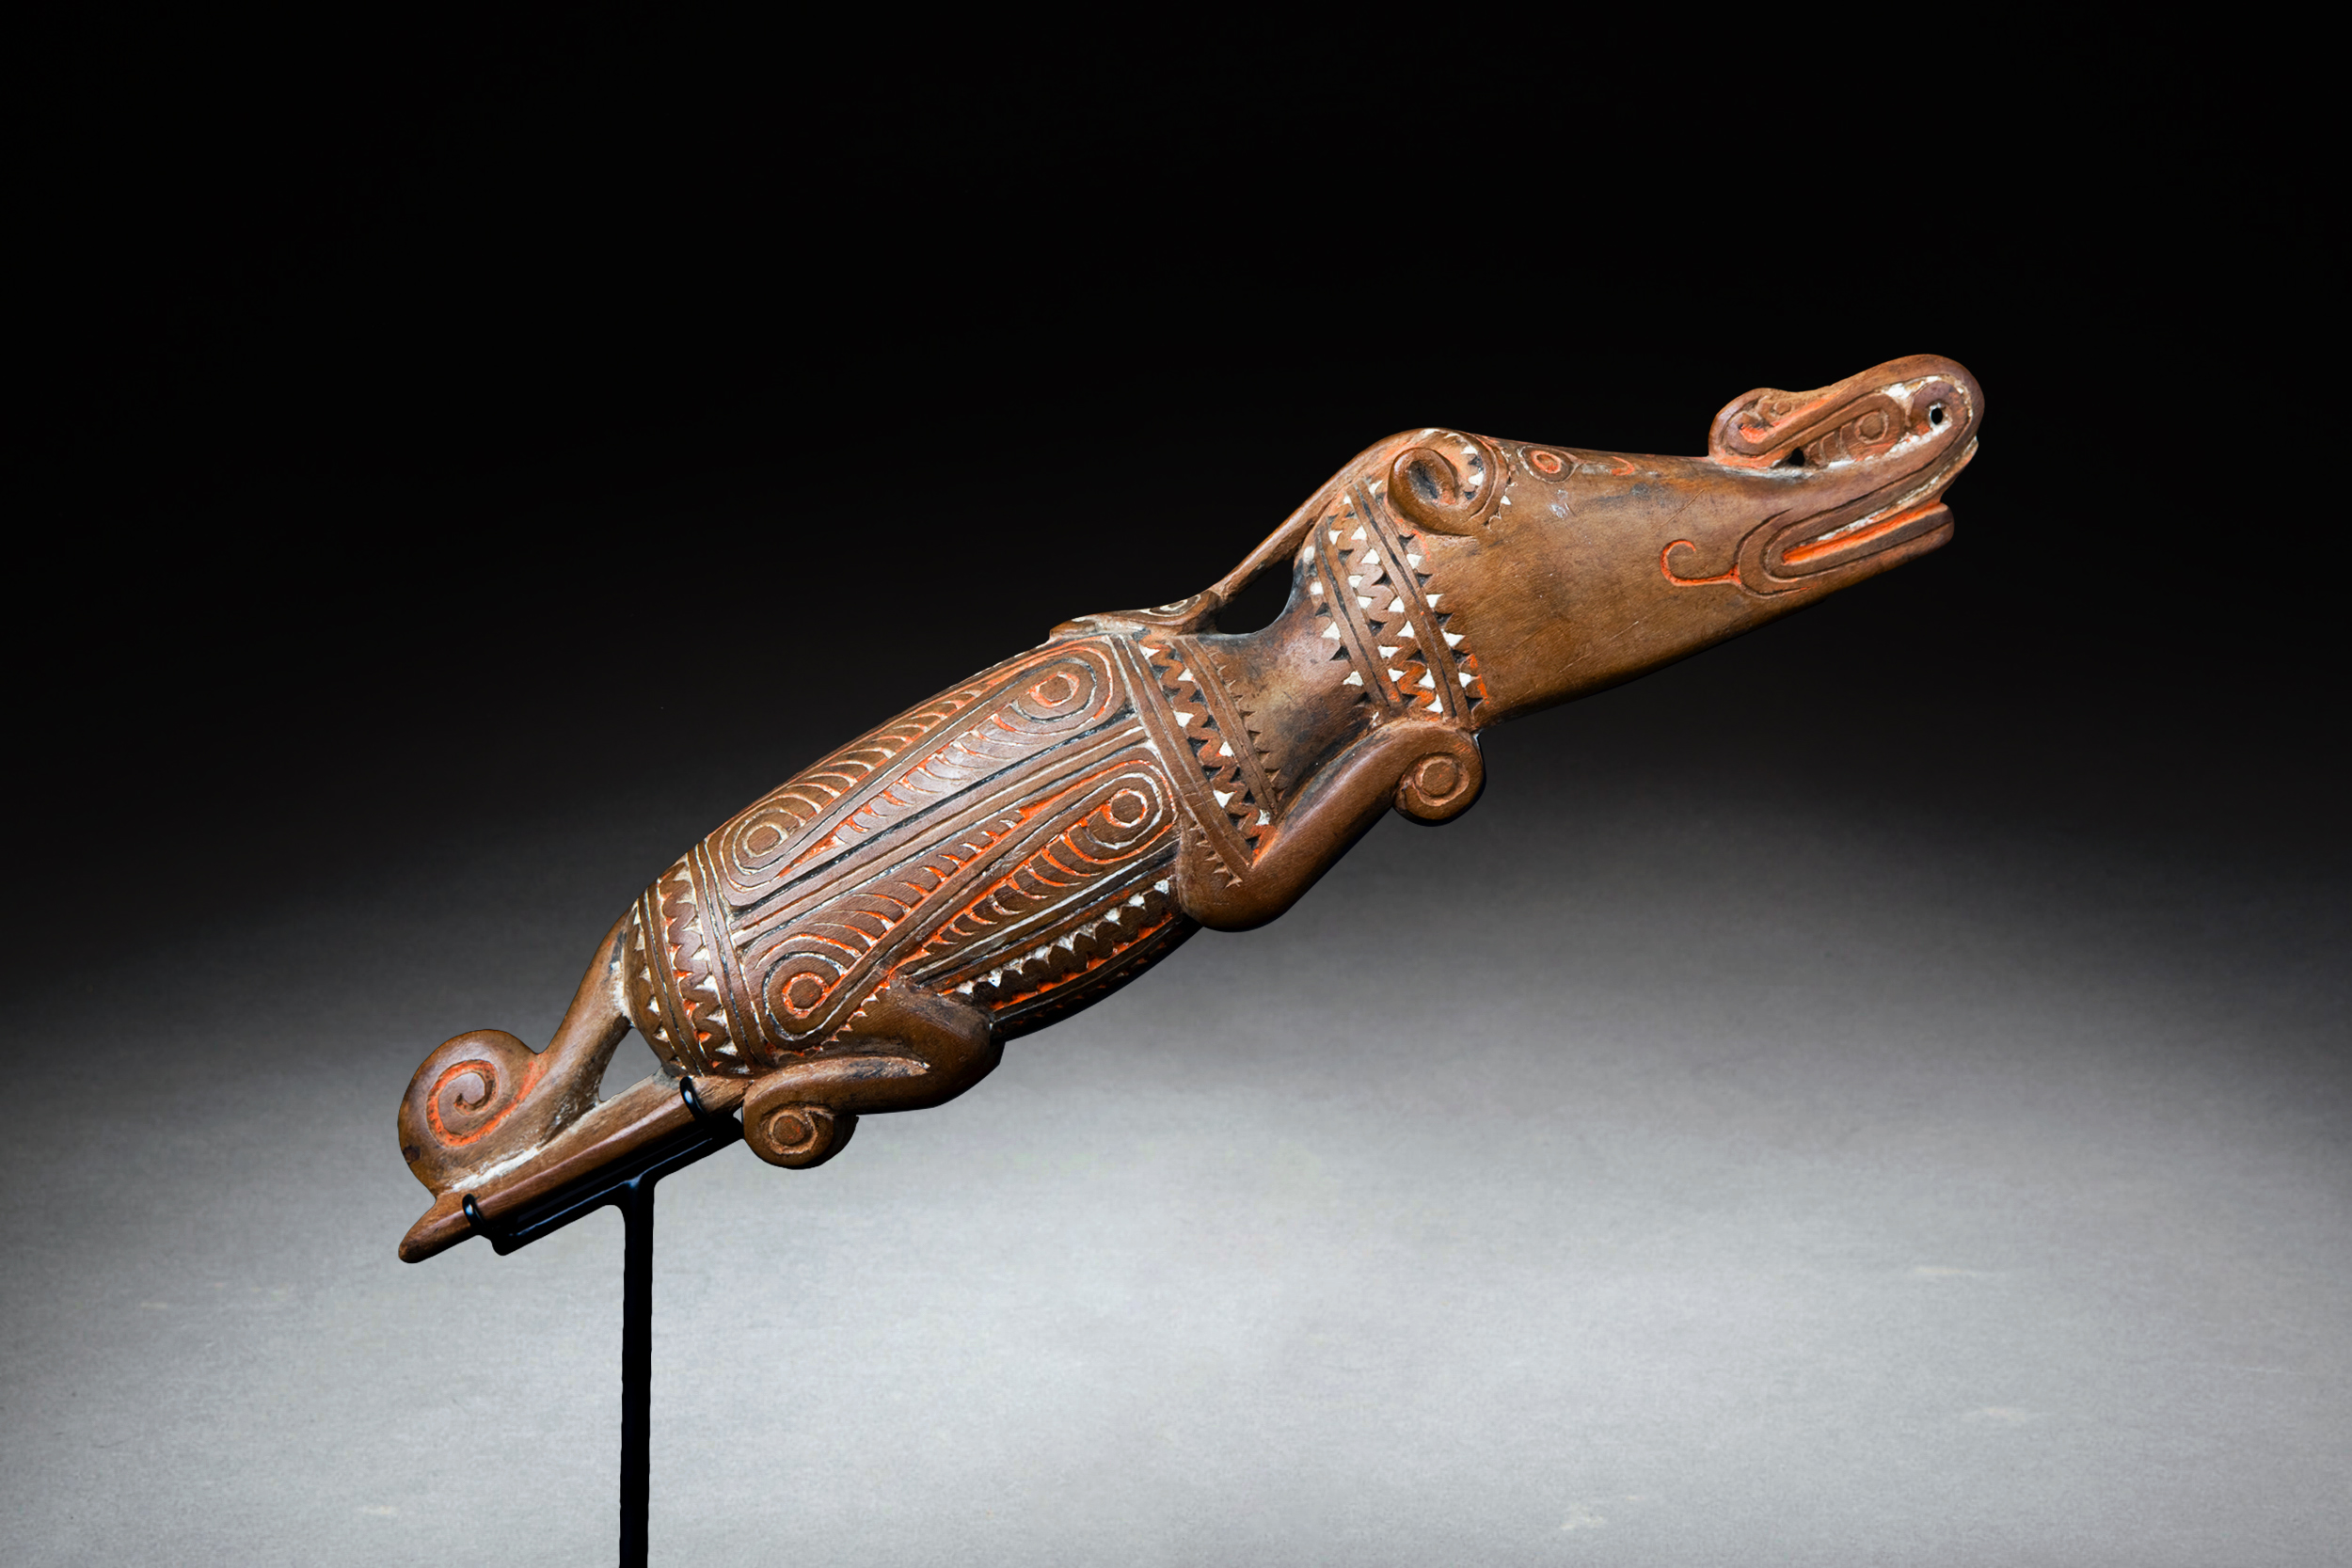 Finely Carved Pig by the 19th Century Massim Master Carver Mutuaga